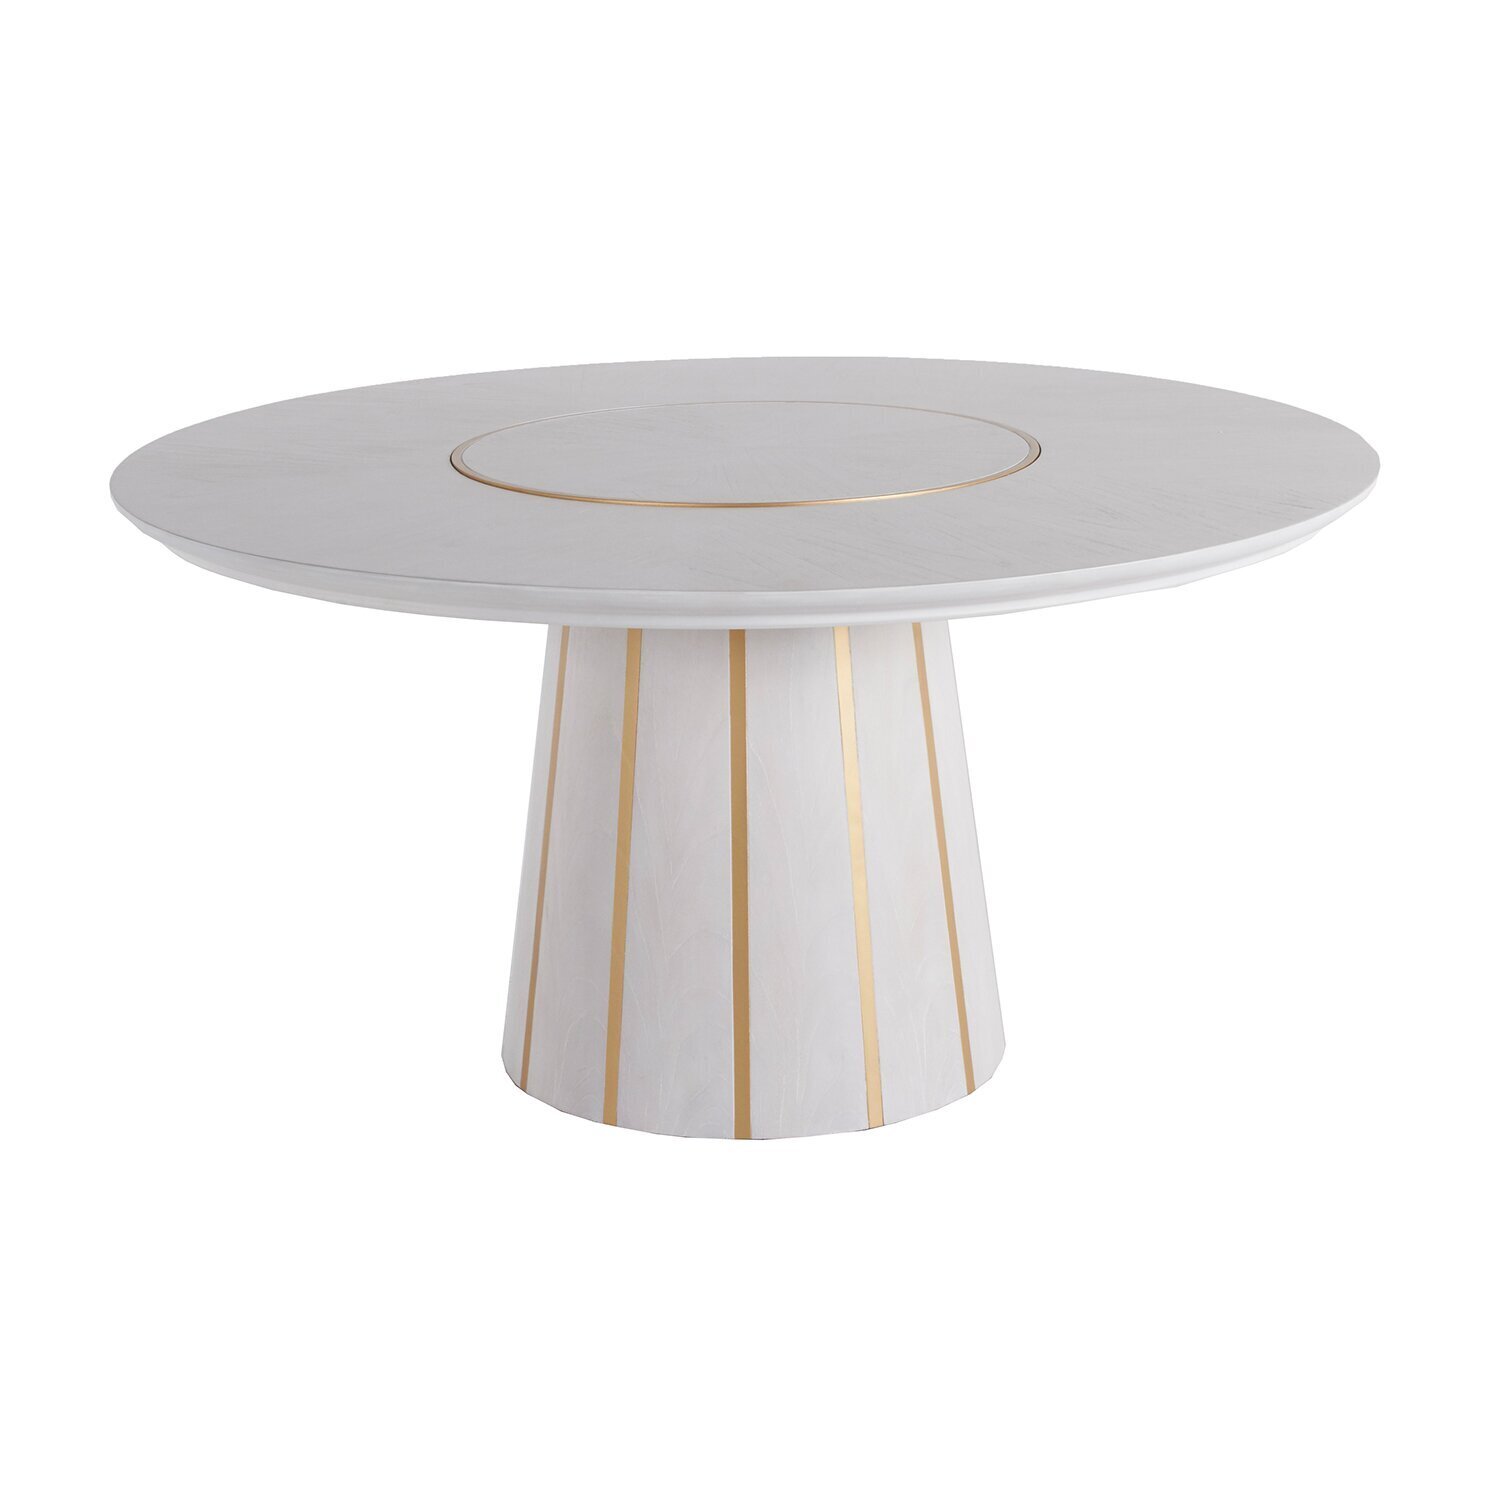 White Pedestal Table With Lazy Susan